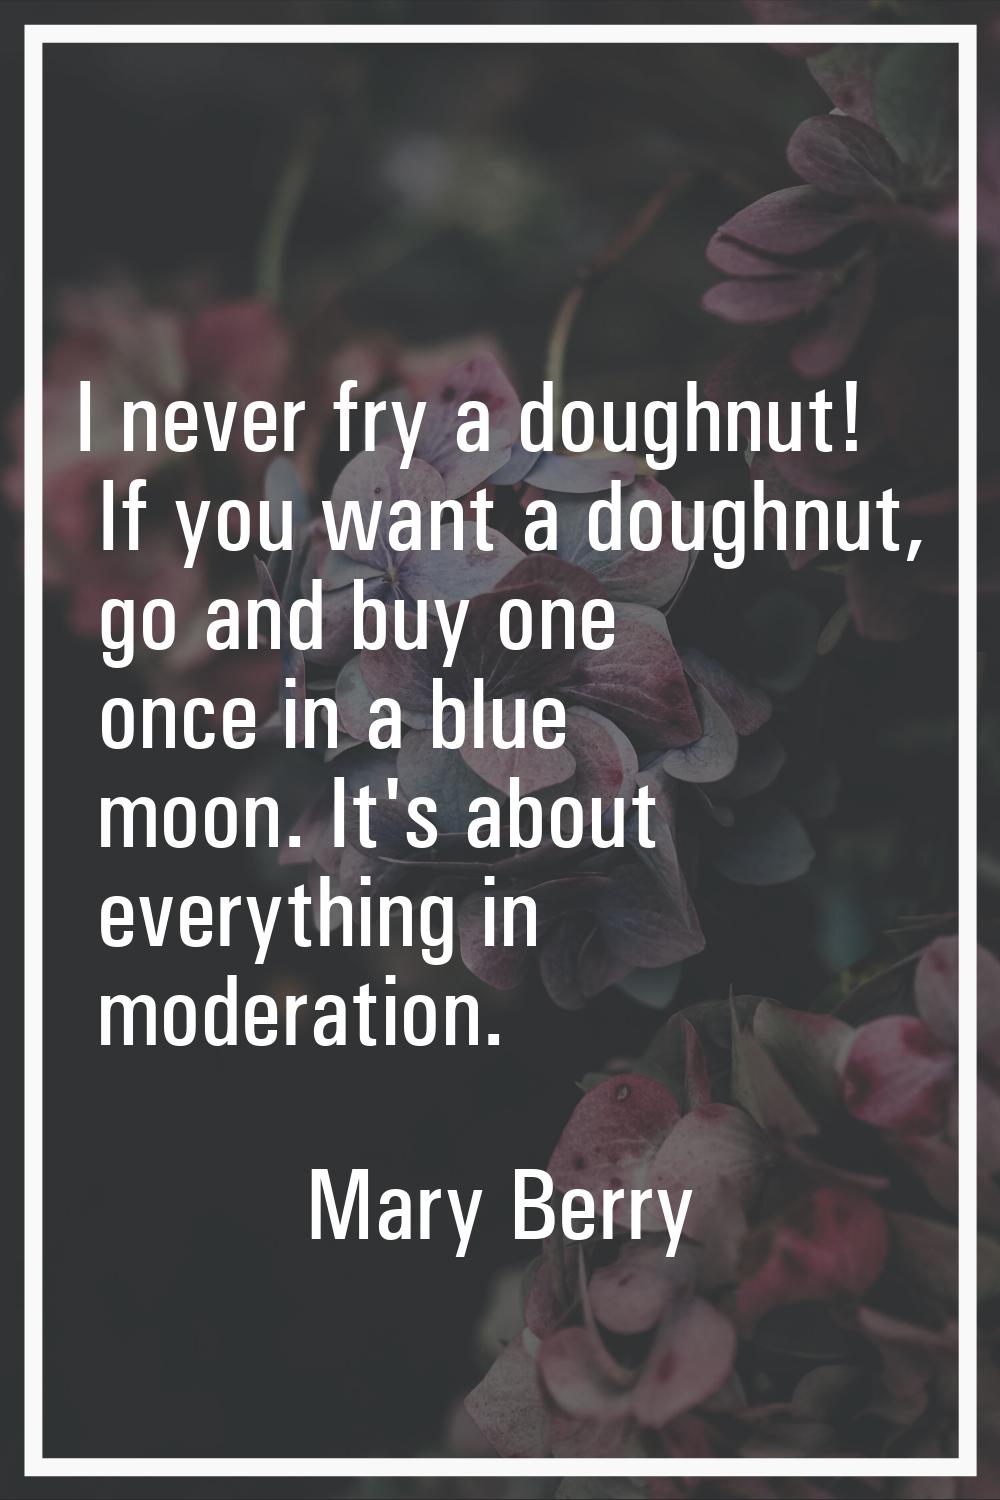 I never fry a doughnut! If you want a doughnut, go and buy one once in a blue moon. It's about ever